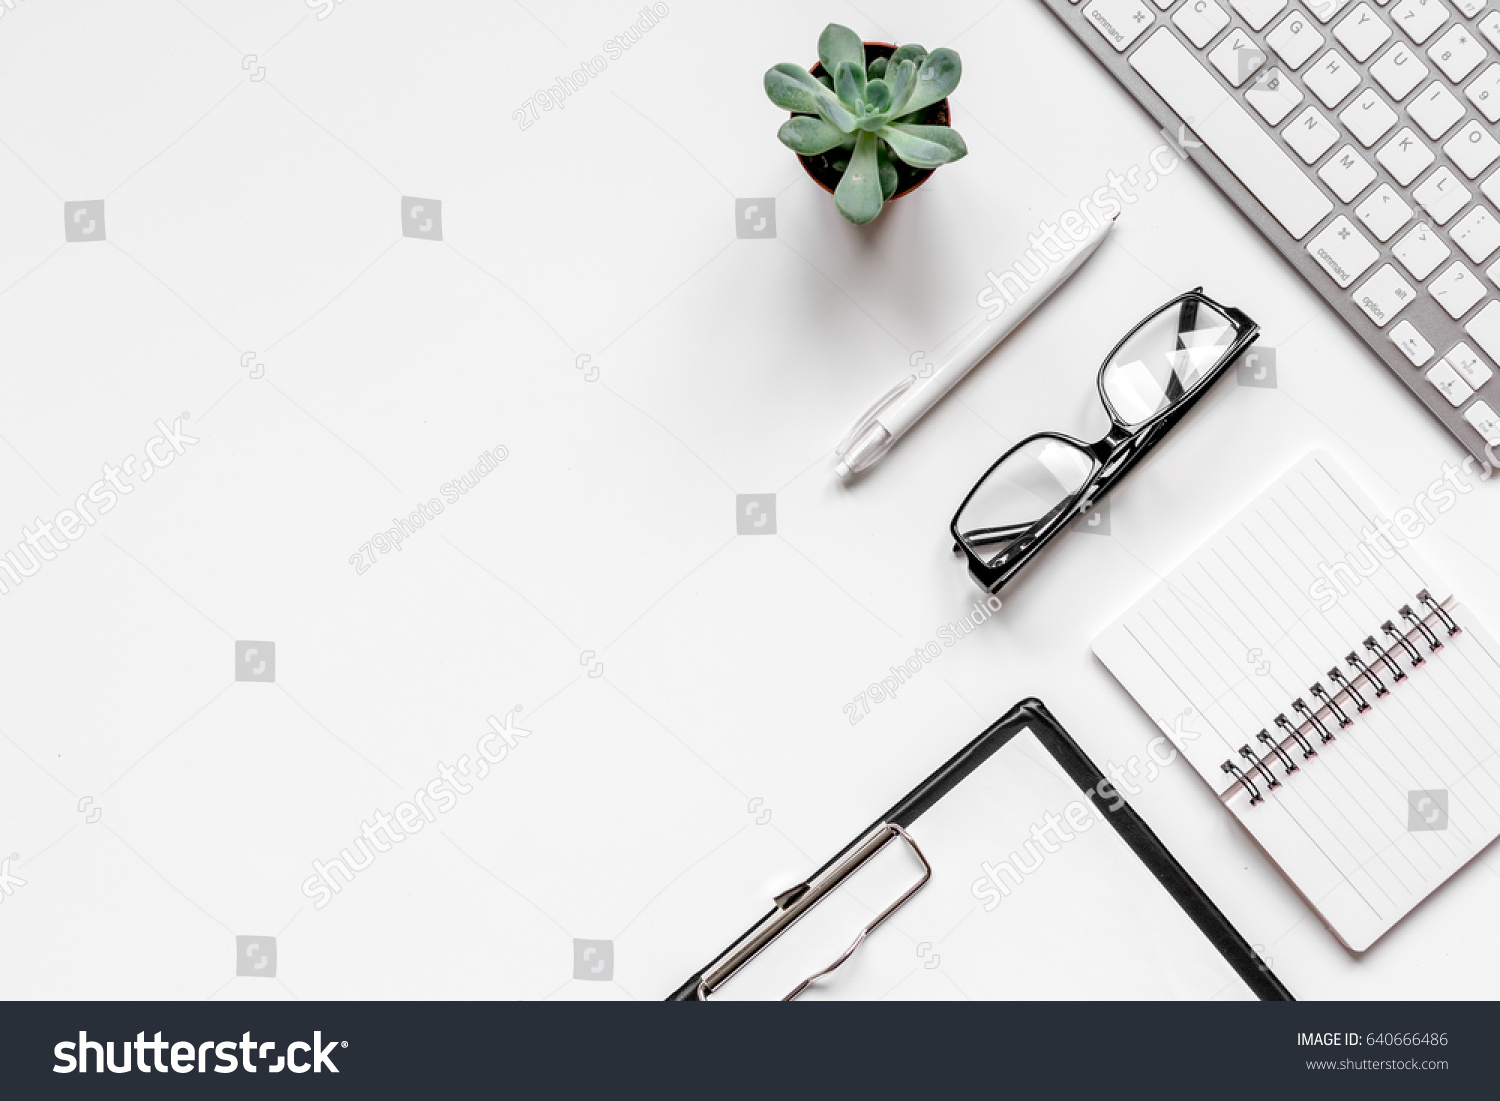 office flat lay with keyboard, glasses, notebook on white background top view mockup #640666486